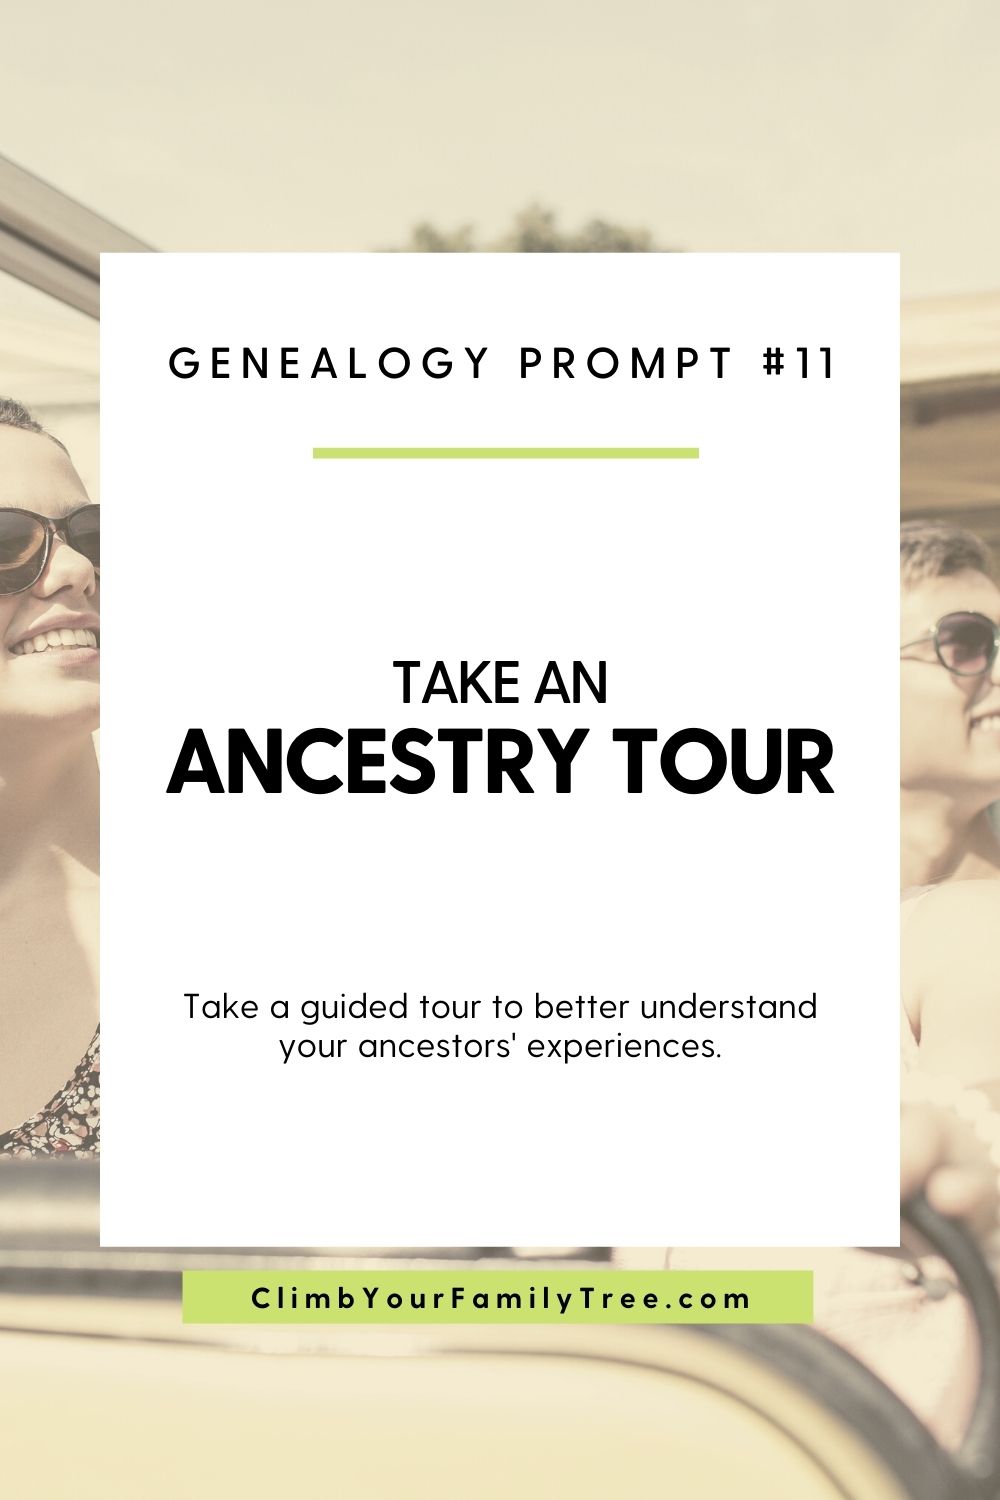 Genealogy Prompt 11 - Take an Ancestry Tour - Take a guided tour to better understand your ancestors' experiences. - ClimbYourFamilyTree.com